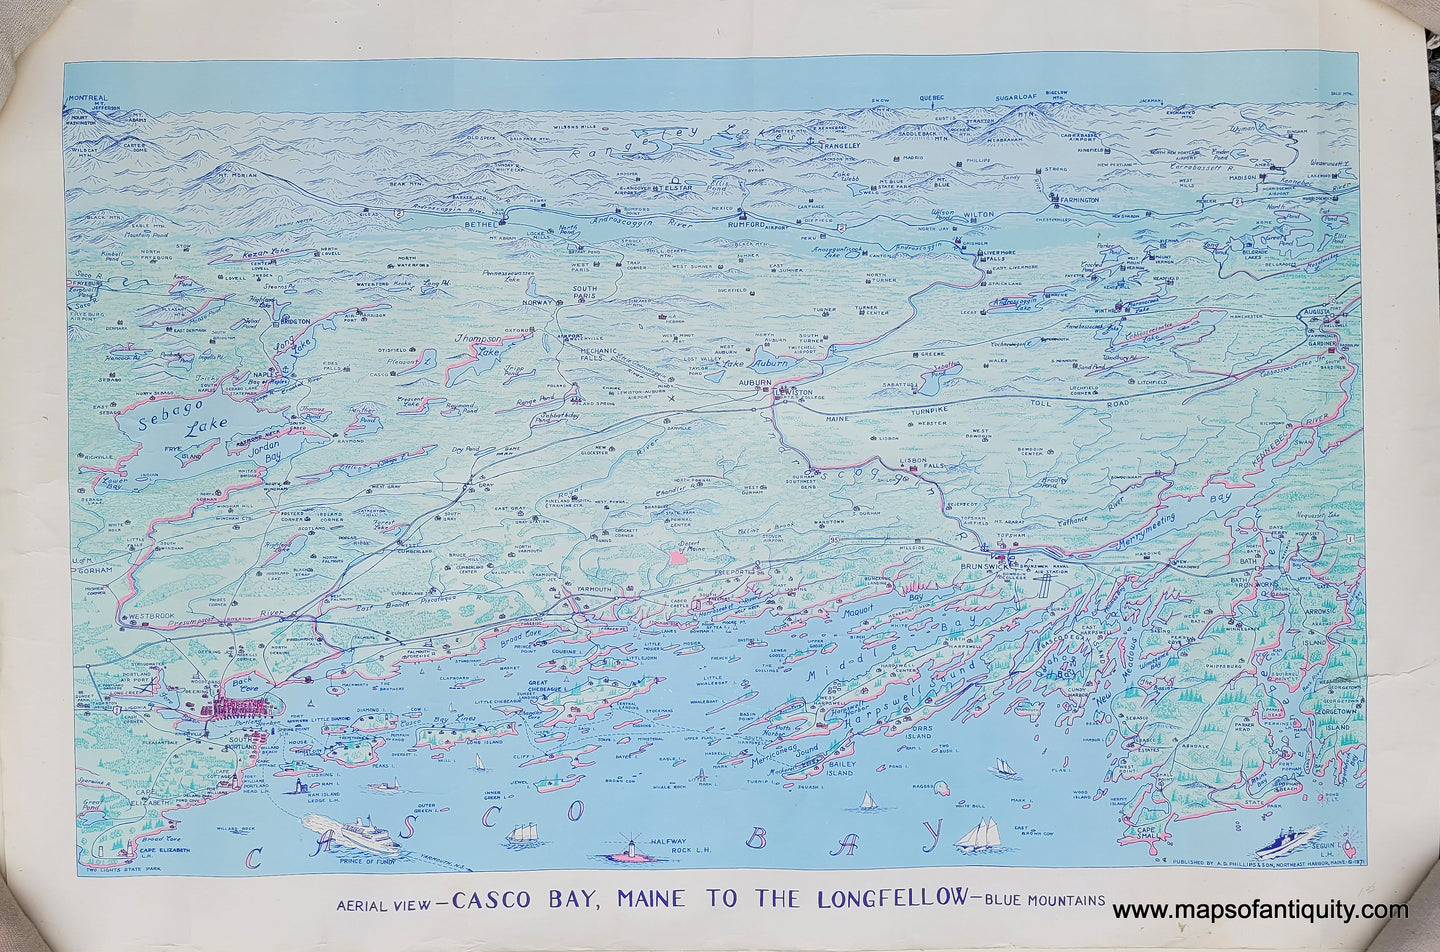 Genuine-Vintage-Map-Aerial-View-Casco-Bay-Maine-to-the-Longfellow-Blue-Mountains-c-1971-A-D-Phillips-Son-Maps-Of-Antiquity